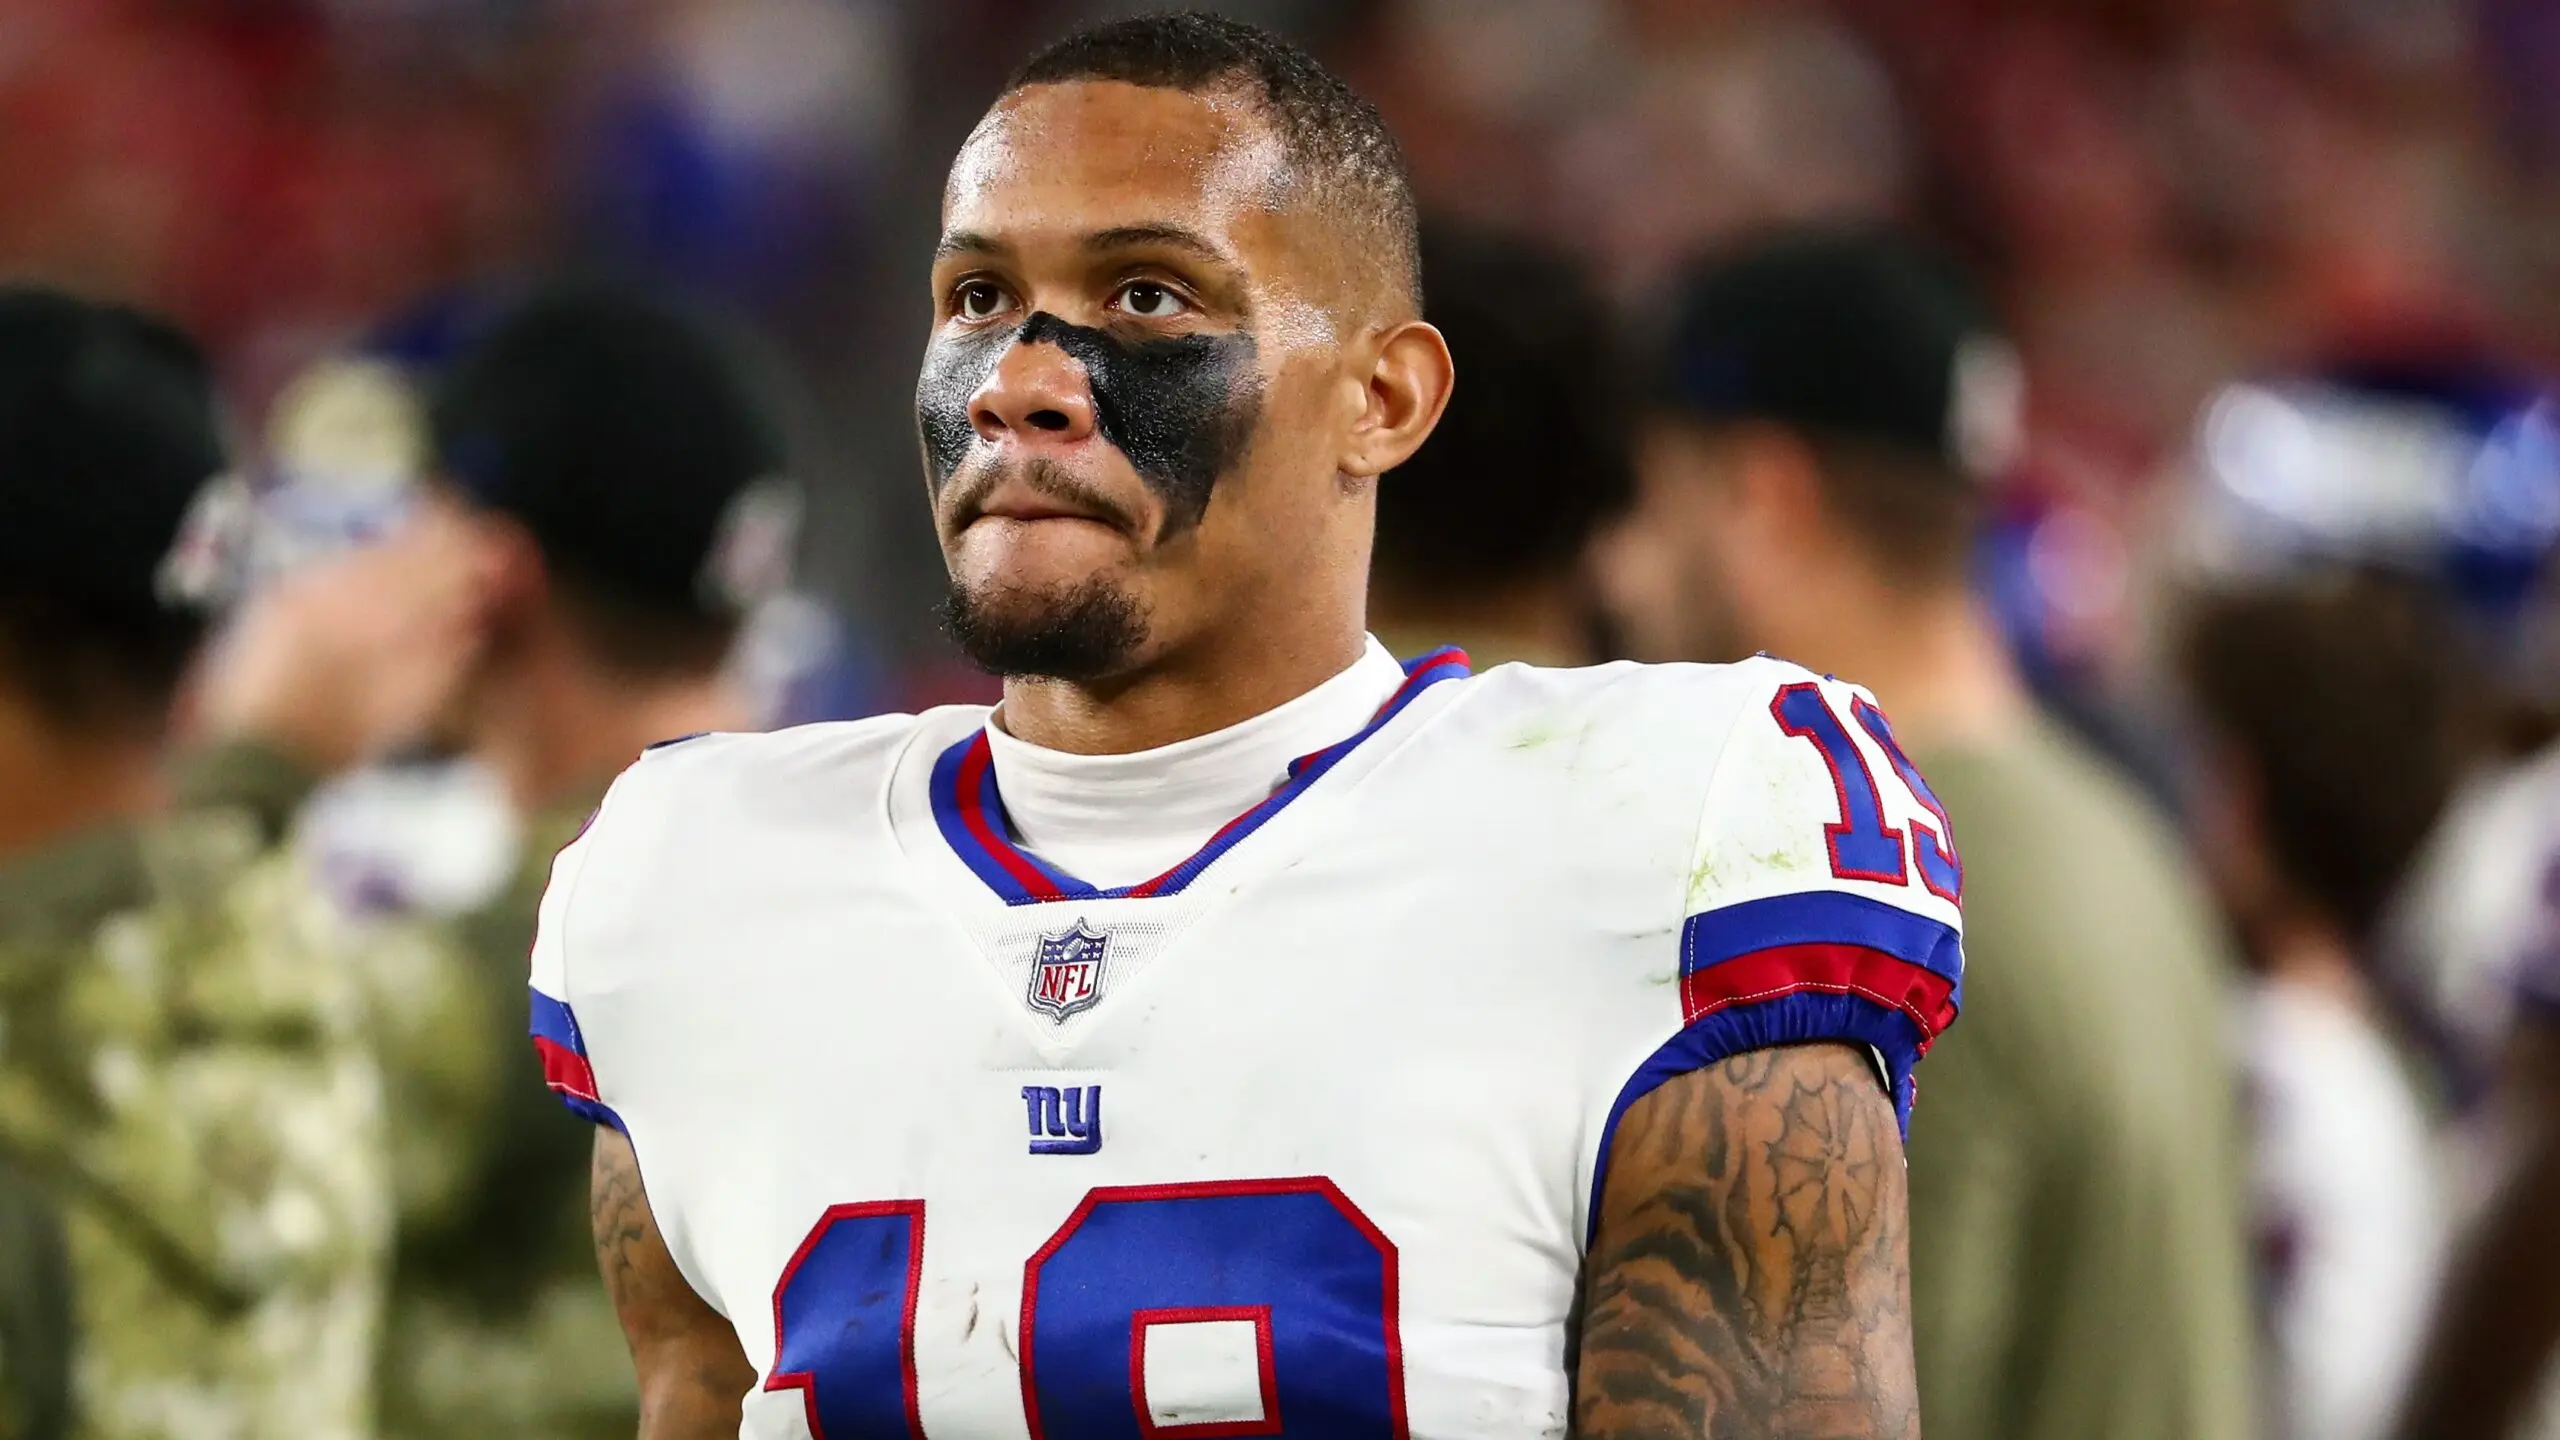 Kenny Golladay, WR dos Giants